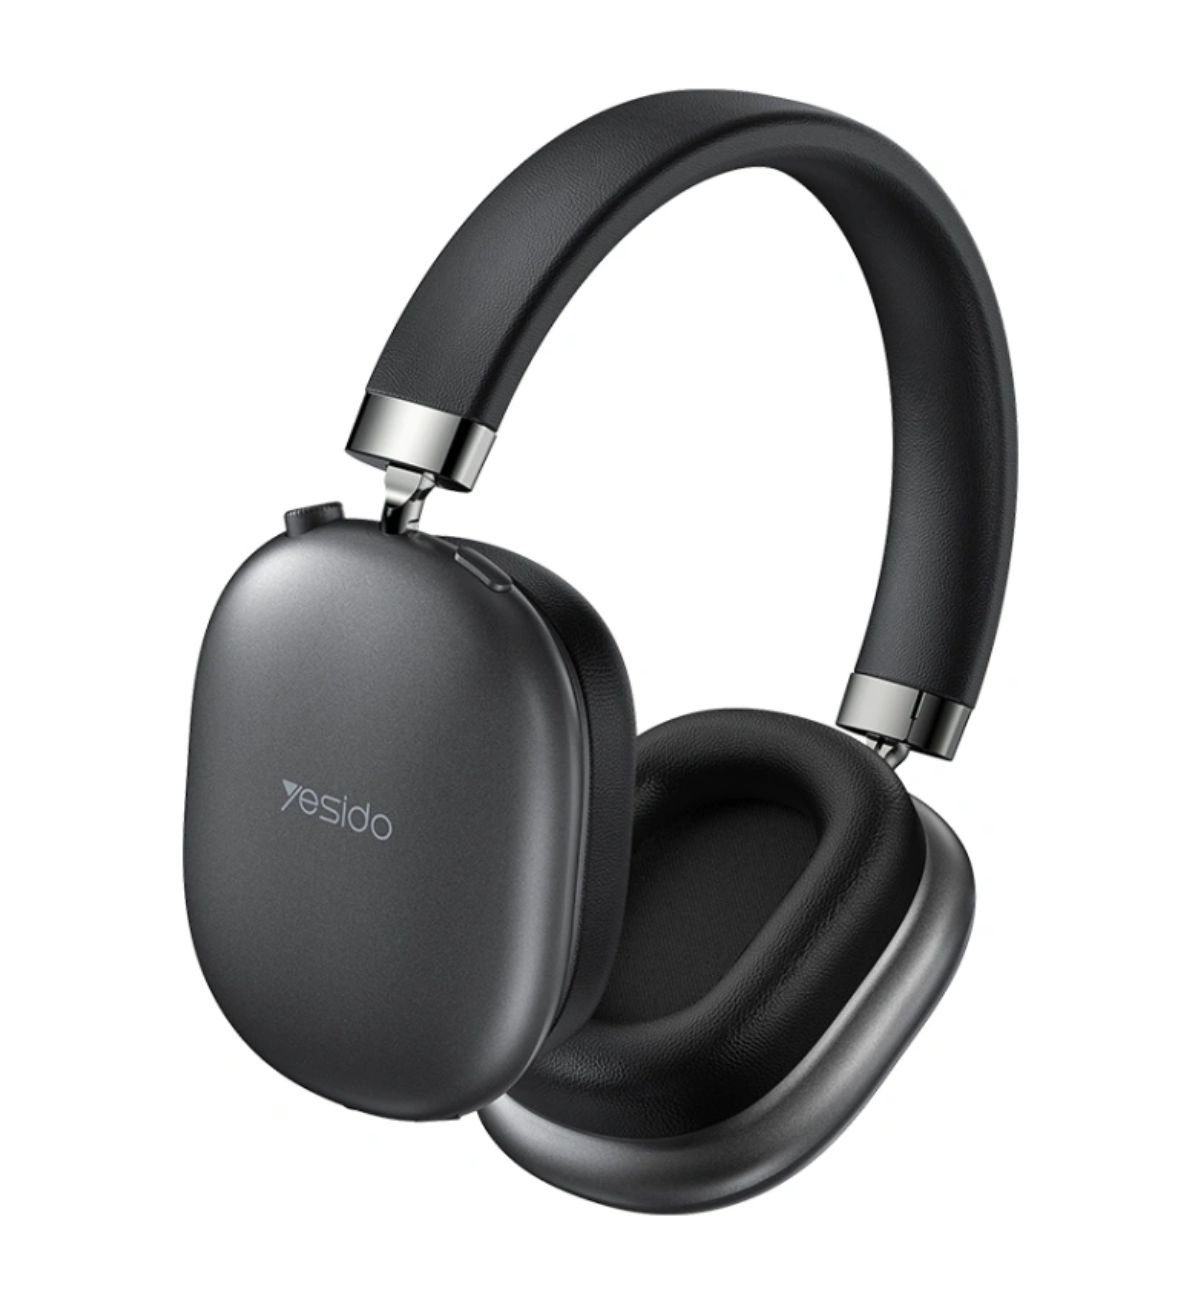 Close-up of the Yesido EP05 Wireless Headset, highlighting the on-ear controls and built-in microphone.